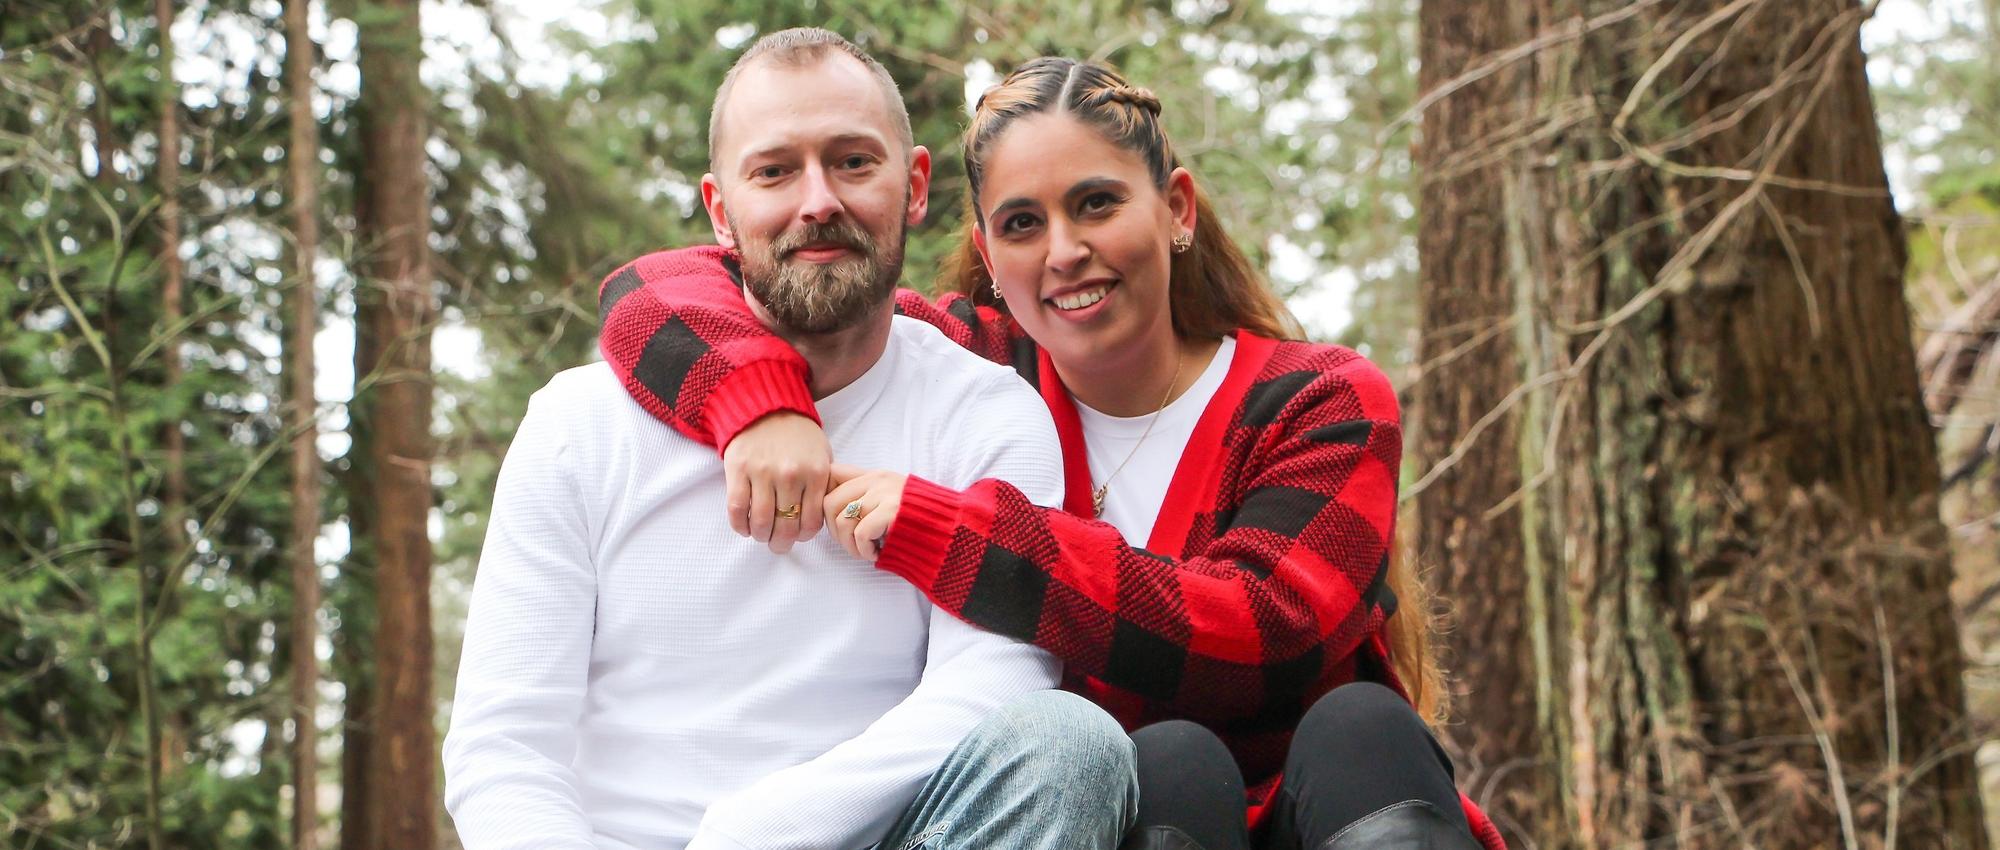 Cord blood donor Lena Mallary and her partner Cory Greenhalgh sit on a fallen tree in a tree park.